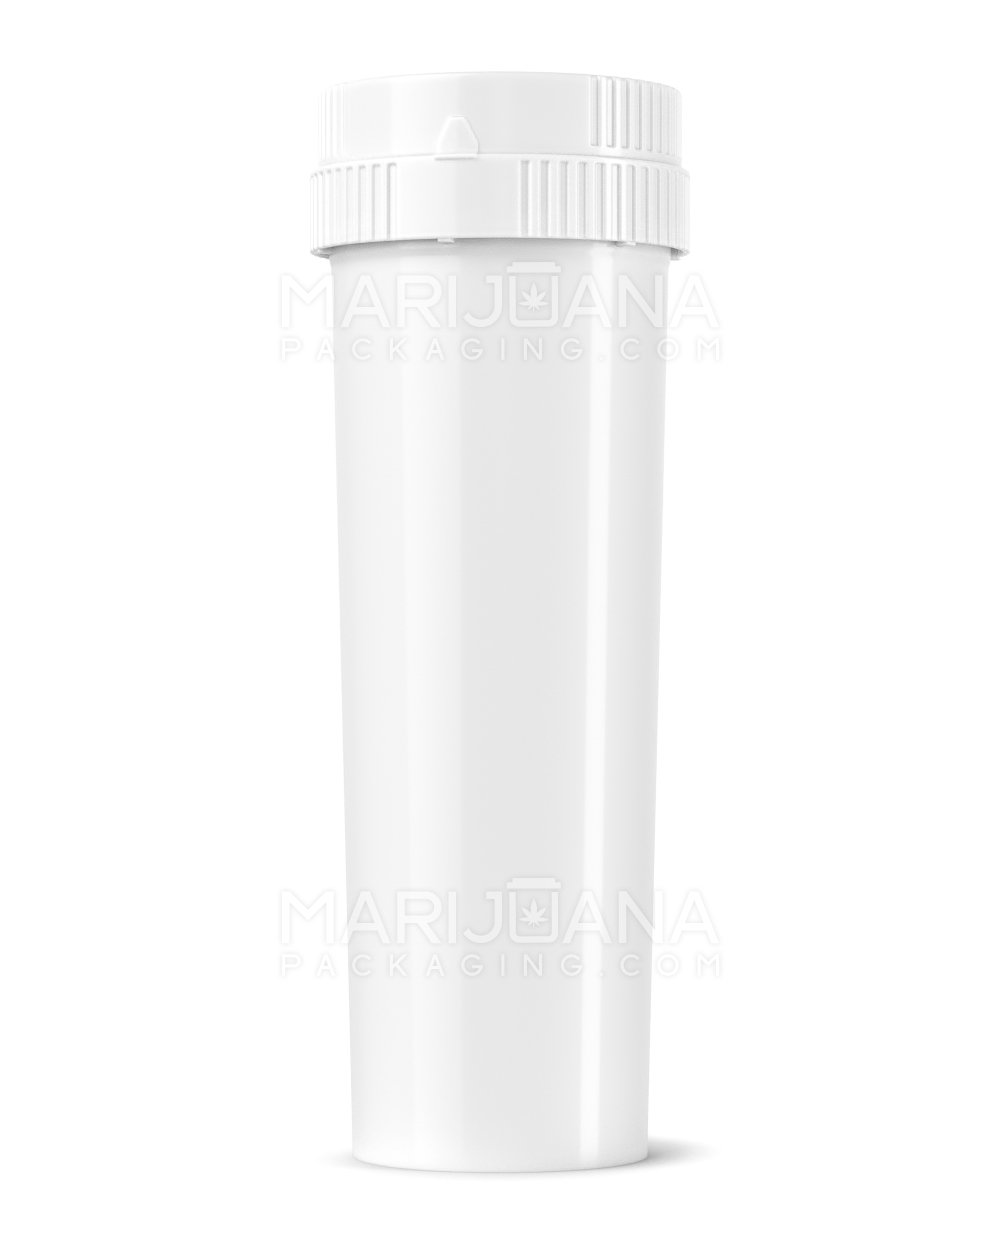 Child Resistant | Push & Turn Vial with Grinder Cap | 60dr - White Plastic - 100 Count - 5